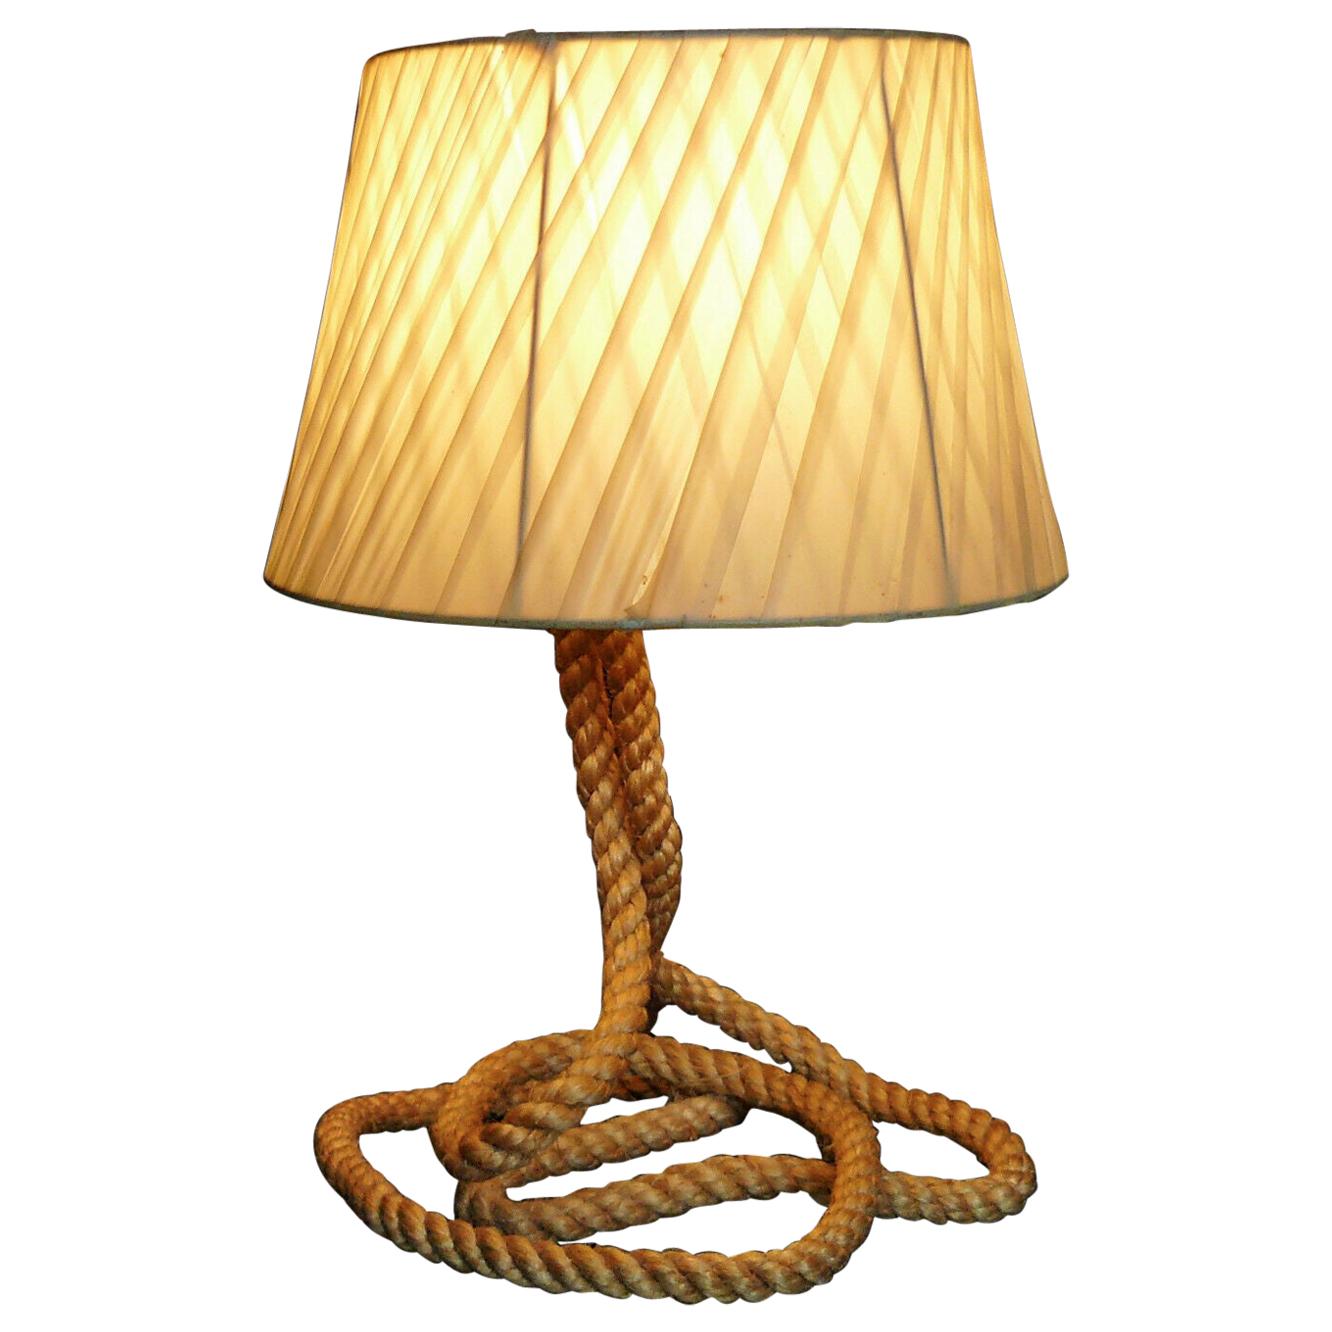 Audoux Minet Rope Table Lamp, 1950 by Adrien Audoux and Frida Minet